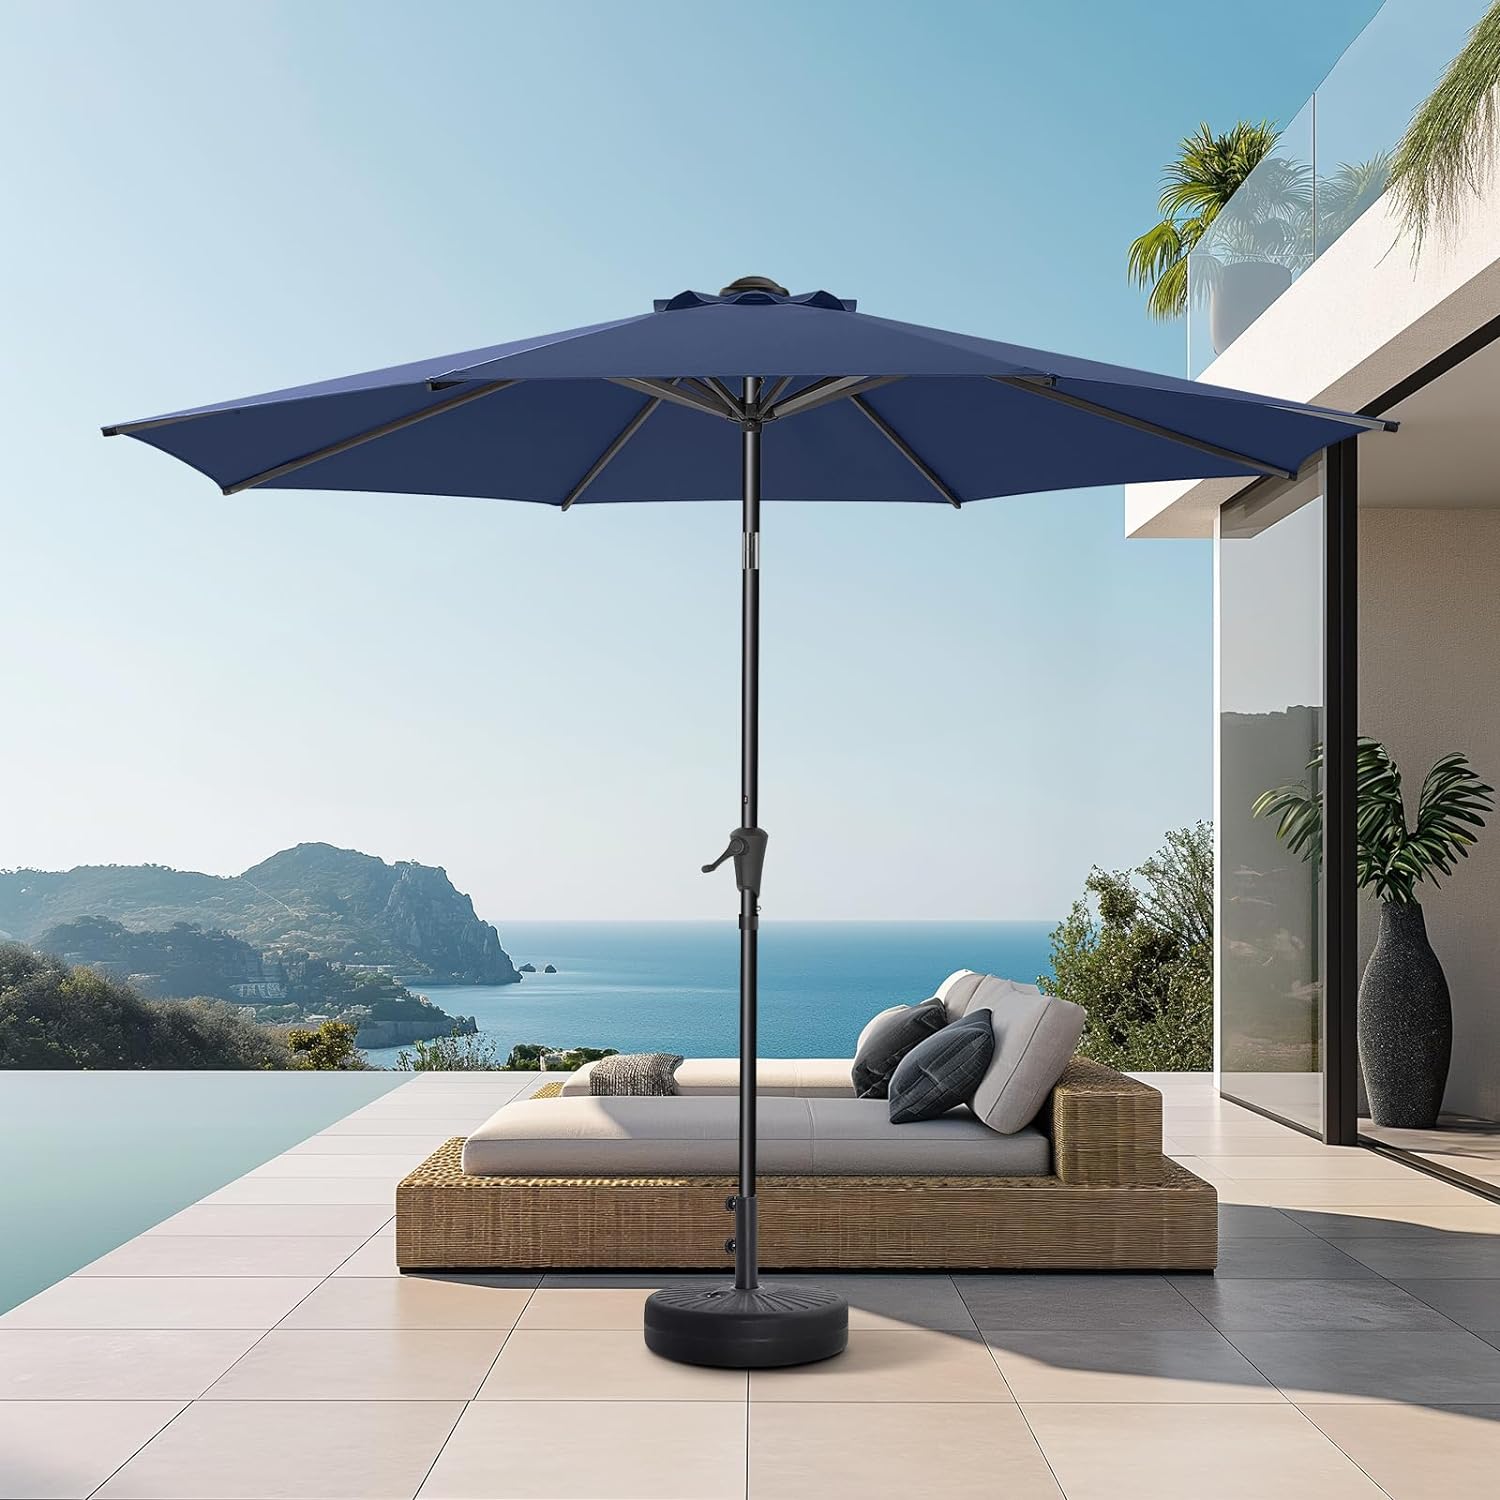 9ft Outdoor Patio Umbrella - Market Table Pool Deck Umbrella UPF50+ UV Protection with Push Button Tilt, Crank and 8 Sturdy Ribs (Navy)